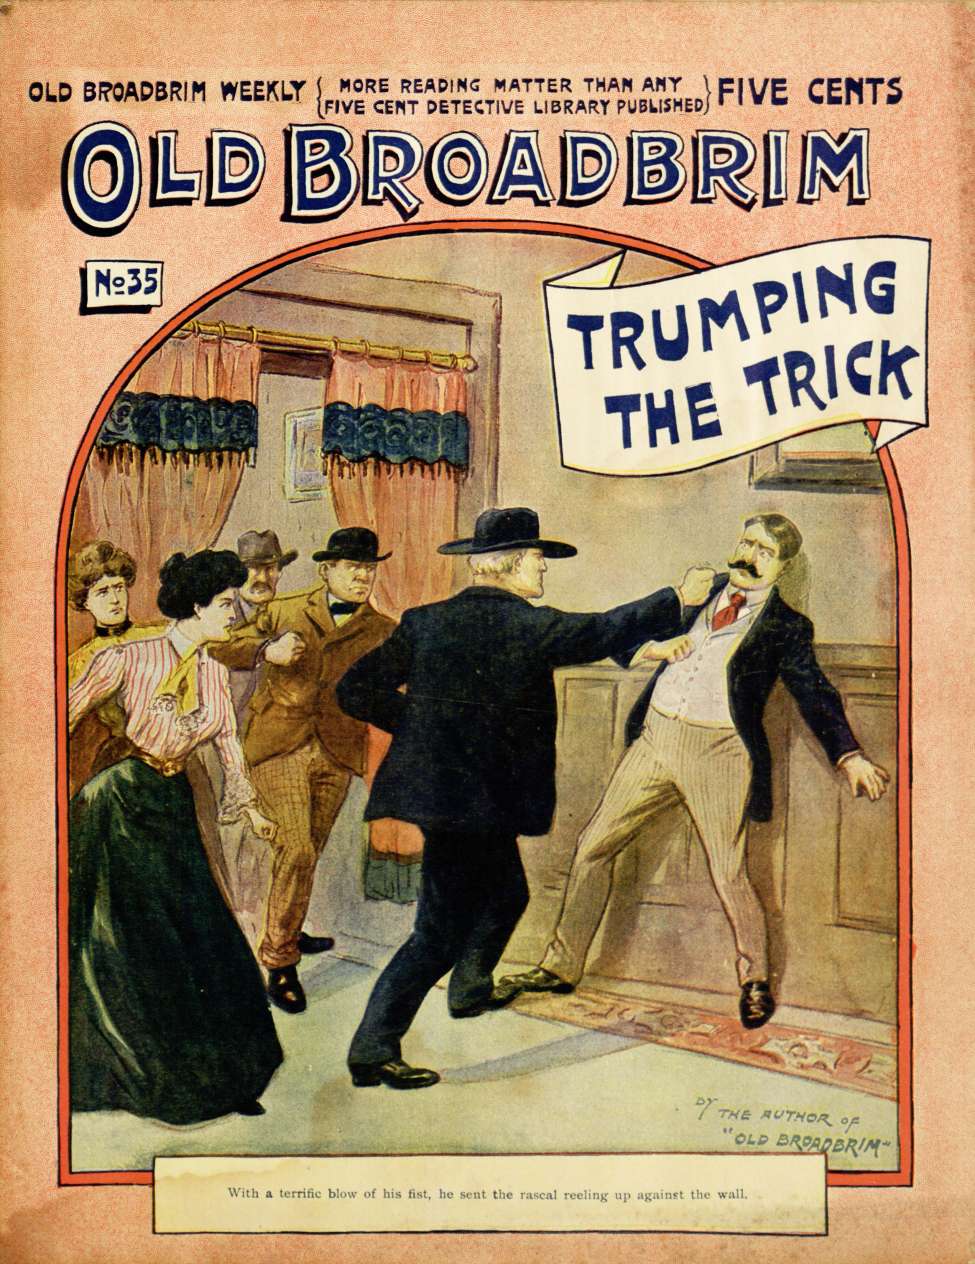 Book Cover For Old Broadbrim Weekly 35